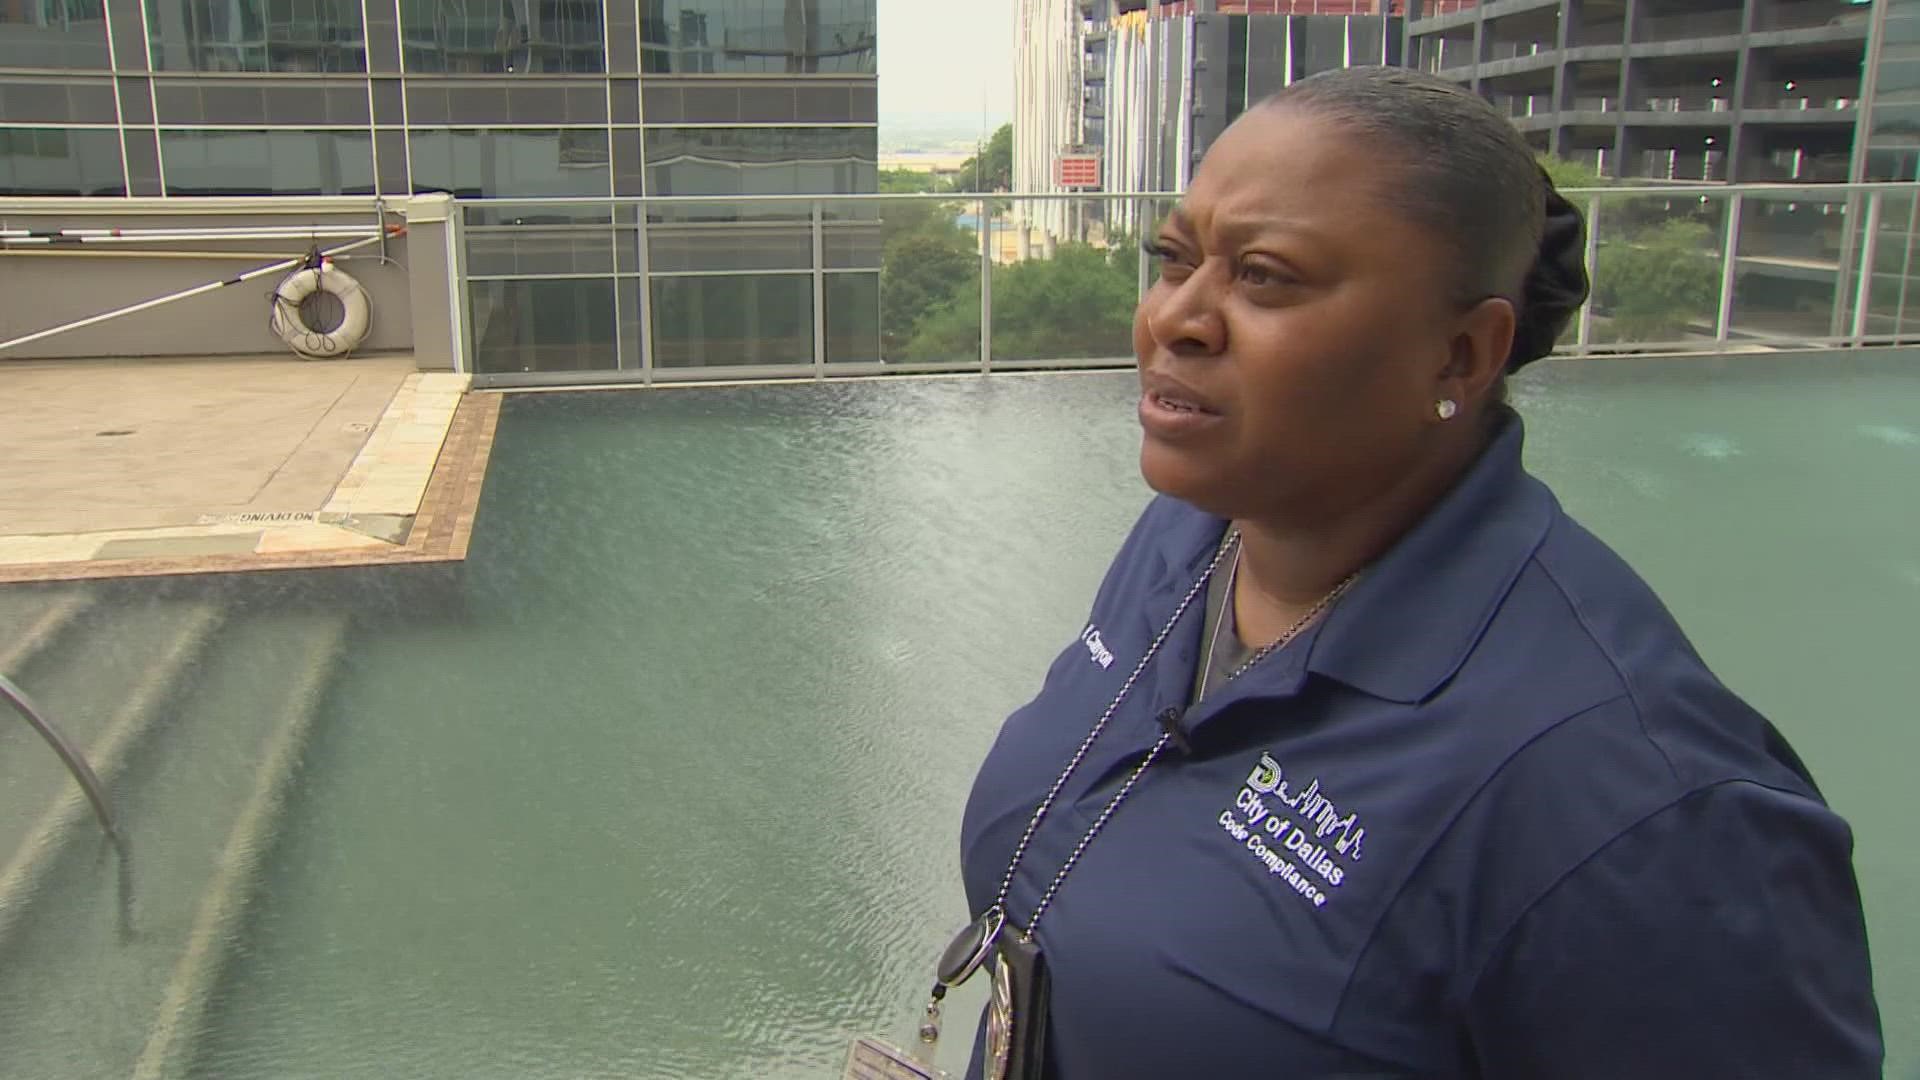 “We take it very seriously. Our goal this year is to not lose any lives,” Dallas Code Officer Nilandra Canyon said.